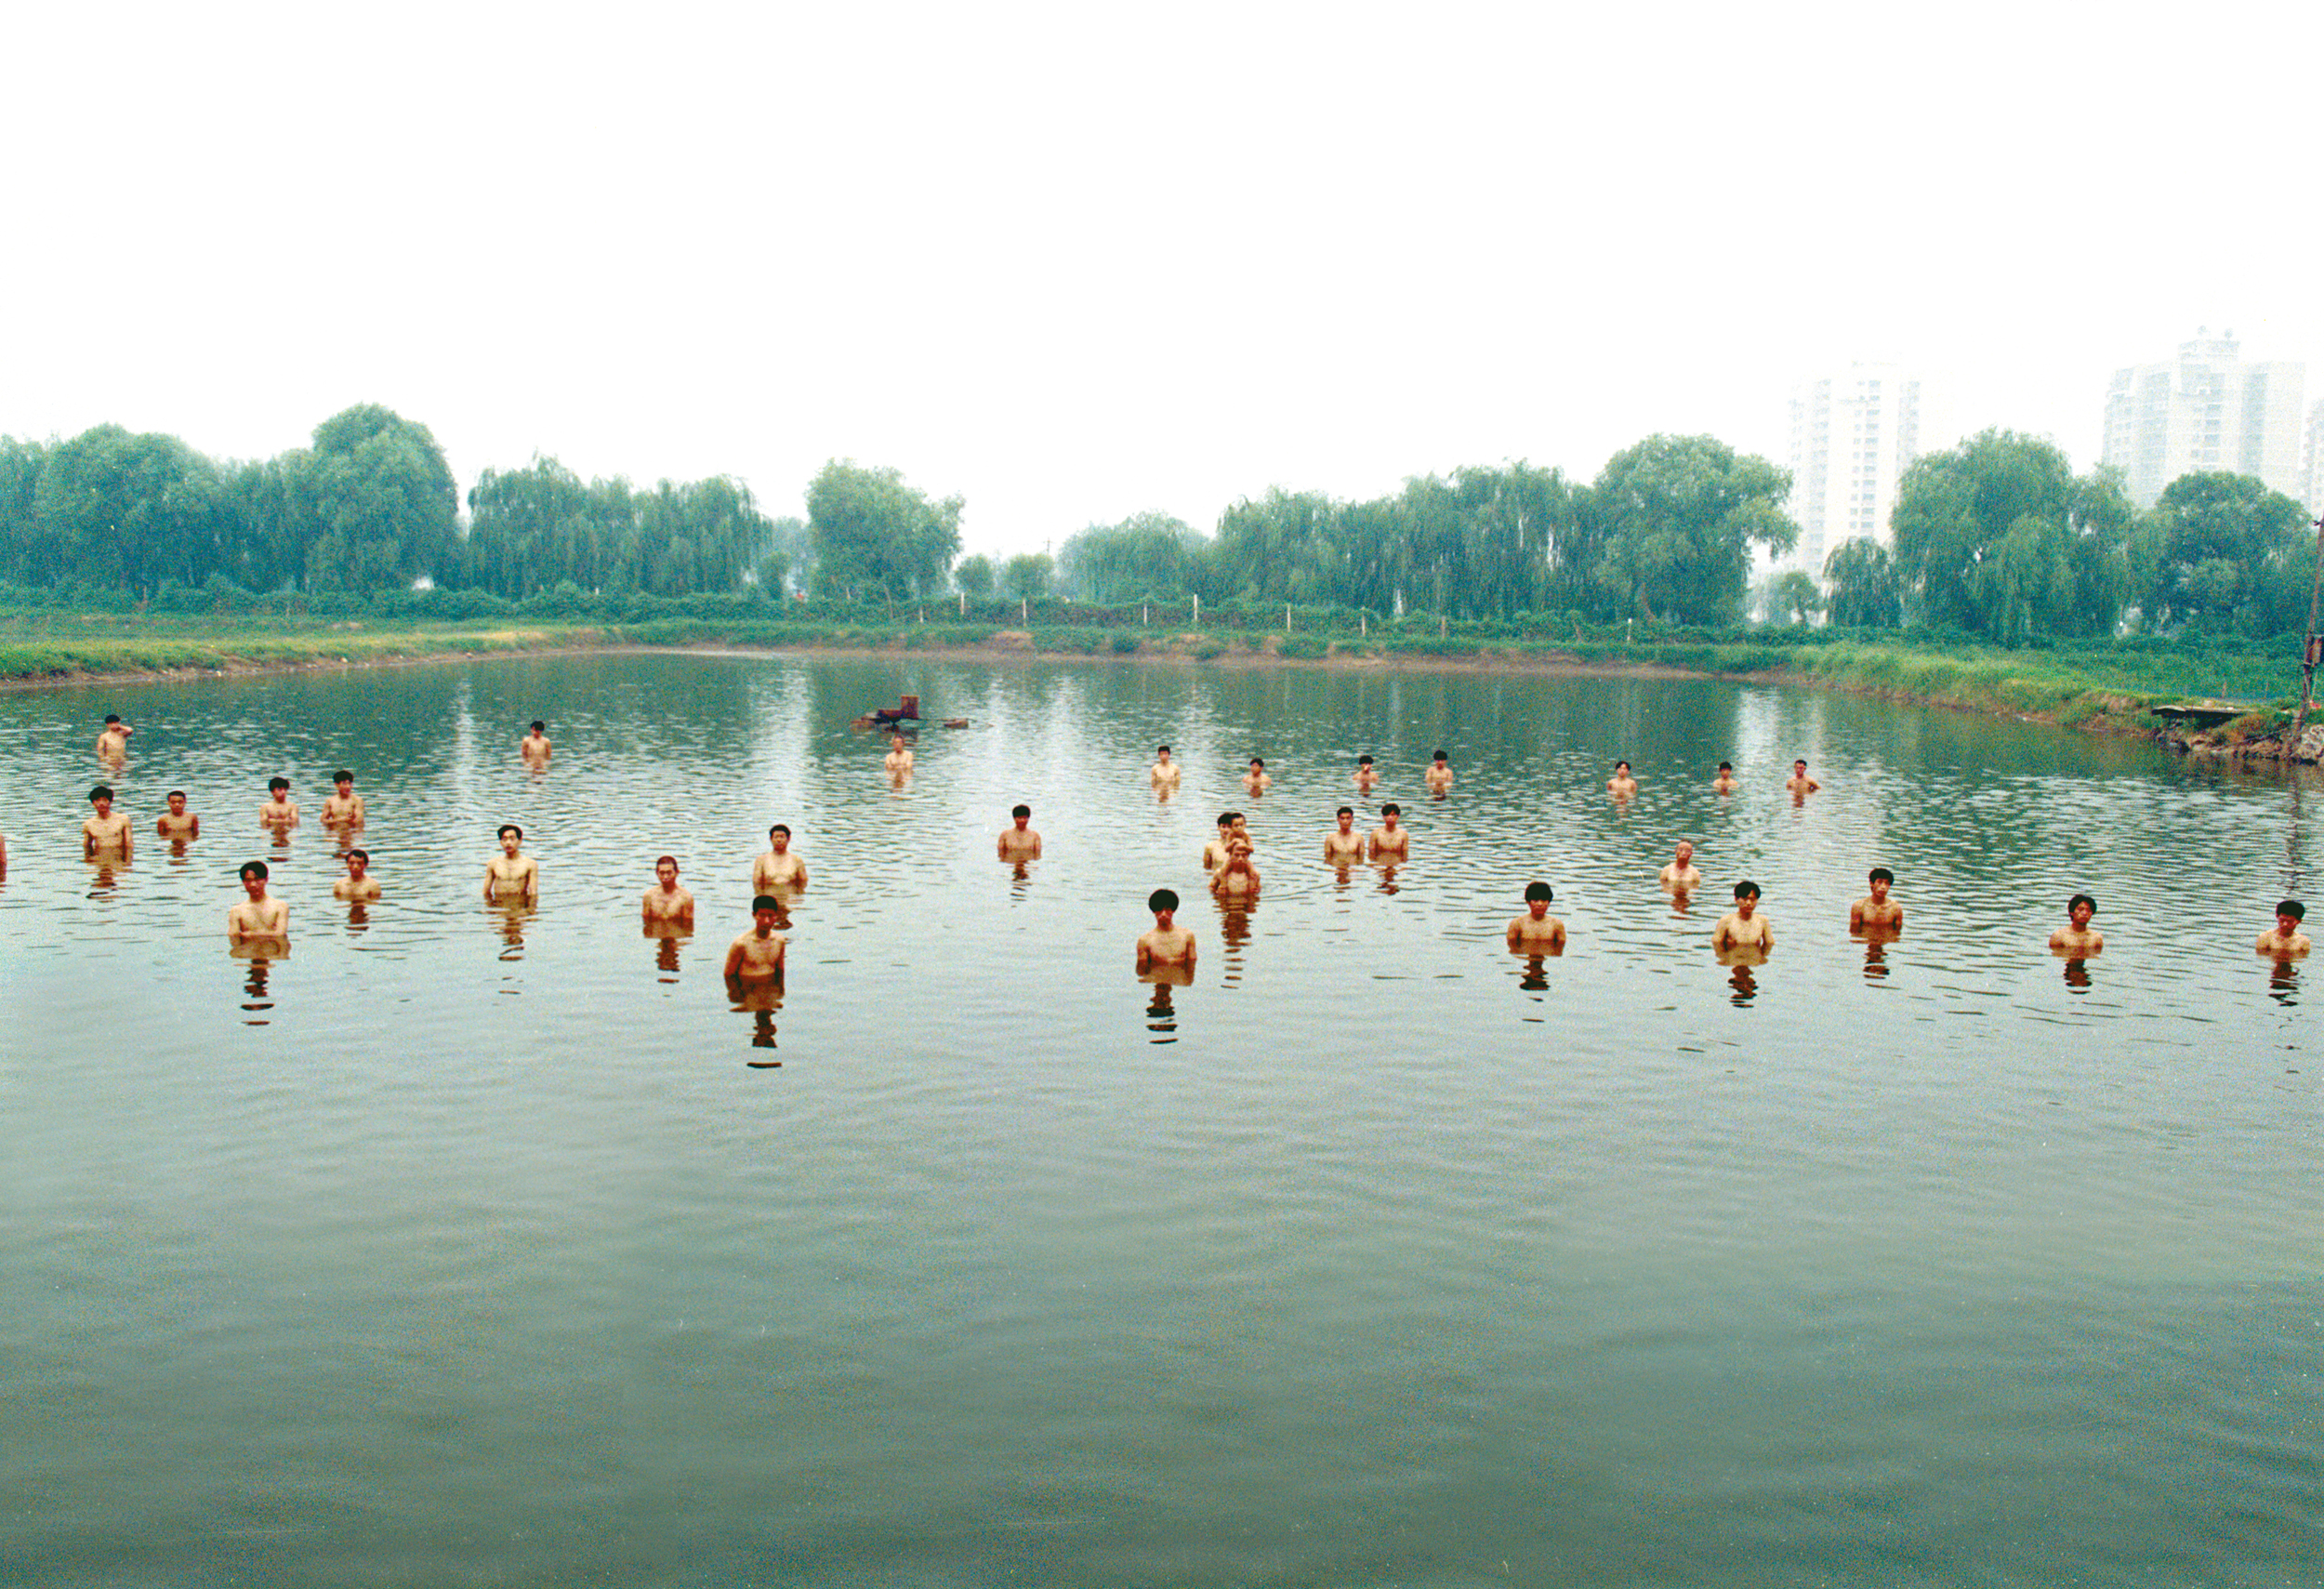 Zhang Huan – To Raise the Water Level in a Fishpond, 1997, 6 min 9 sec, Beijing, China